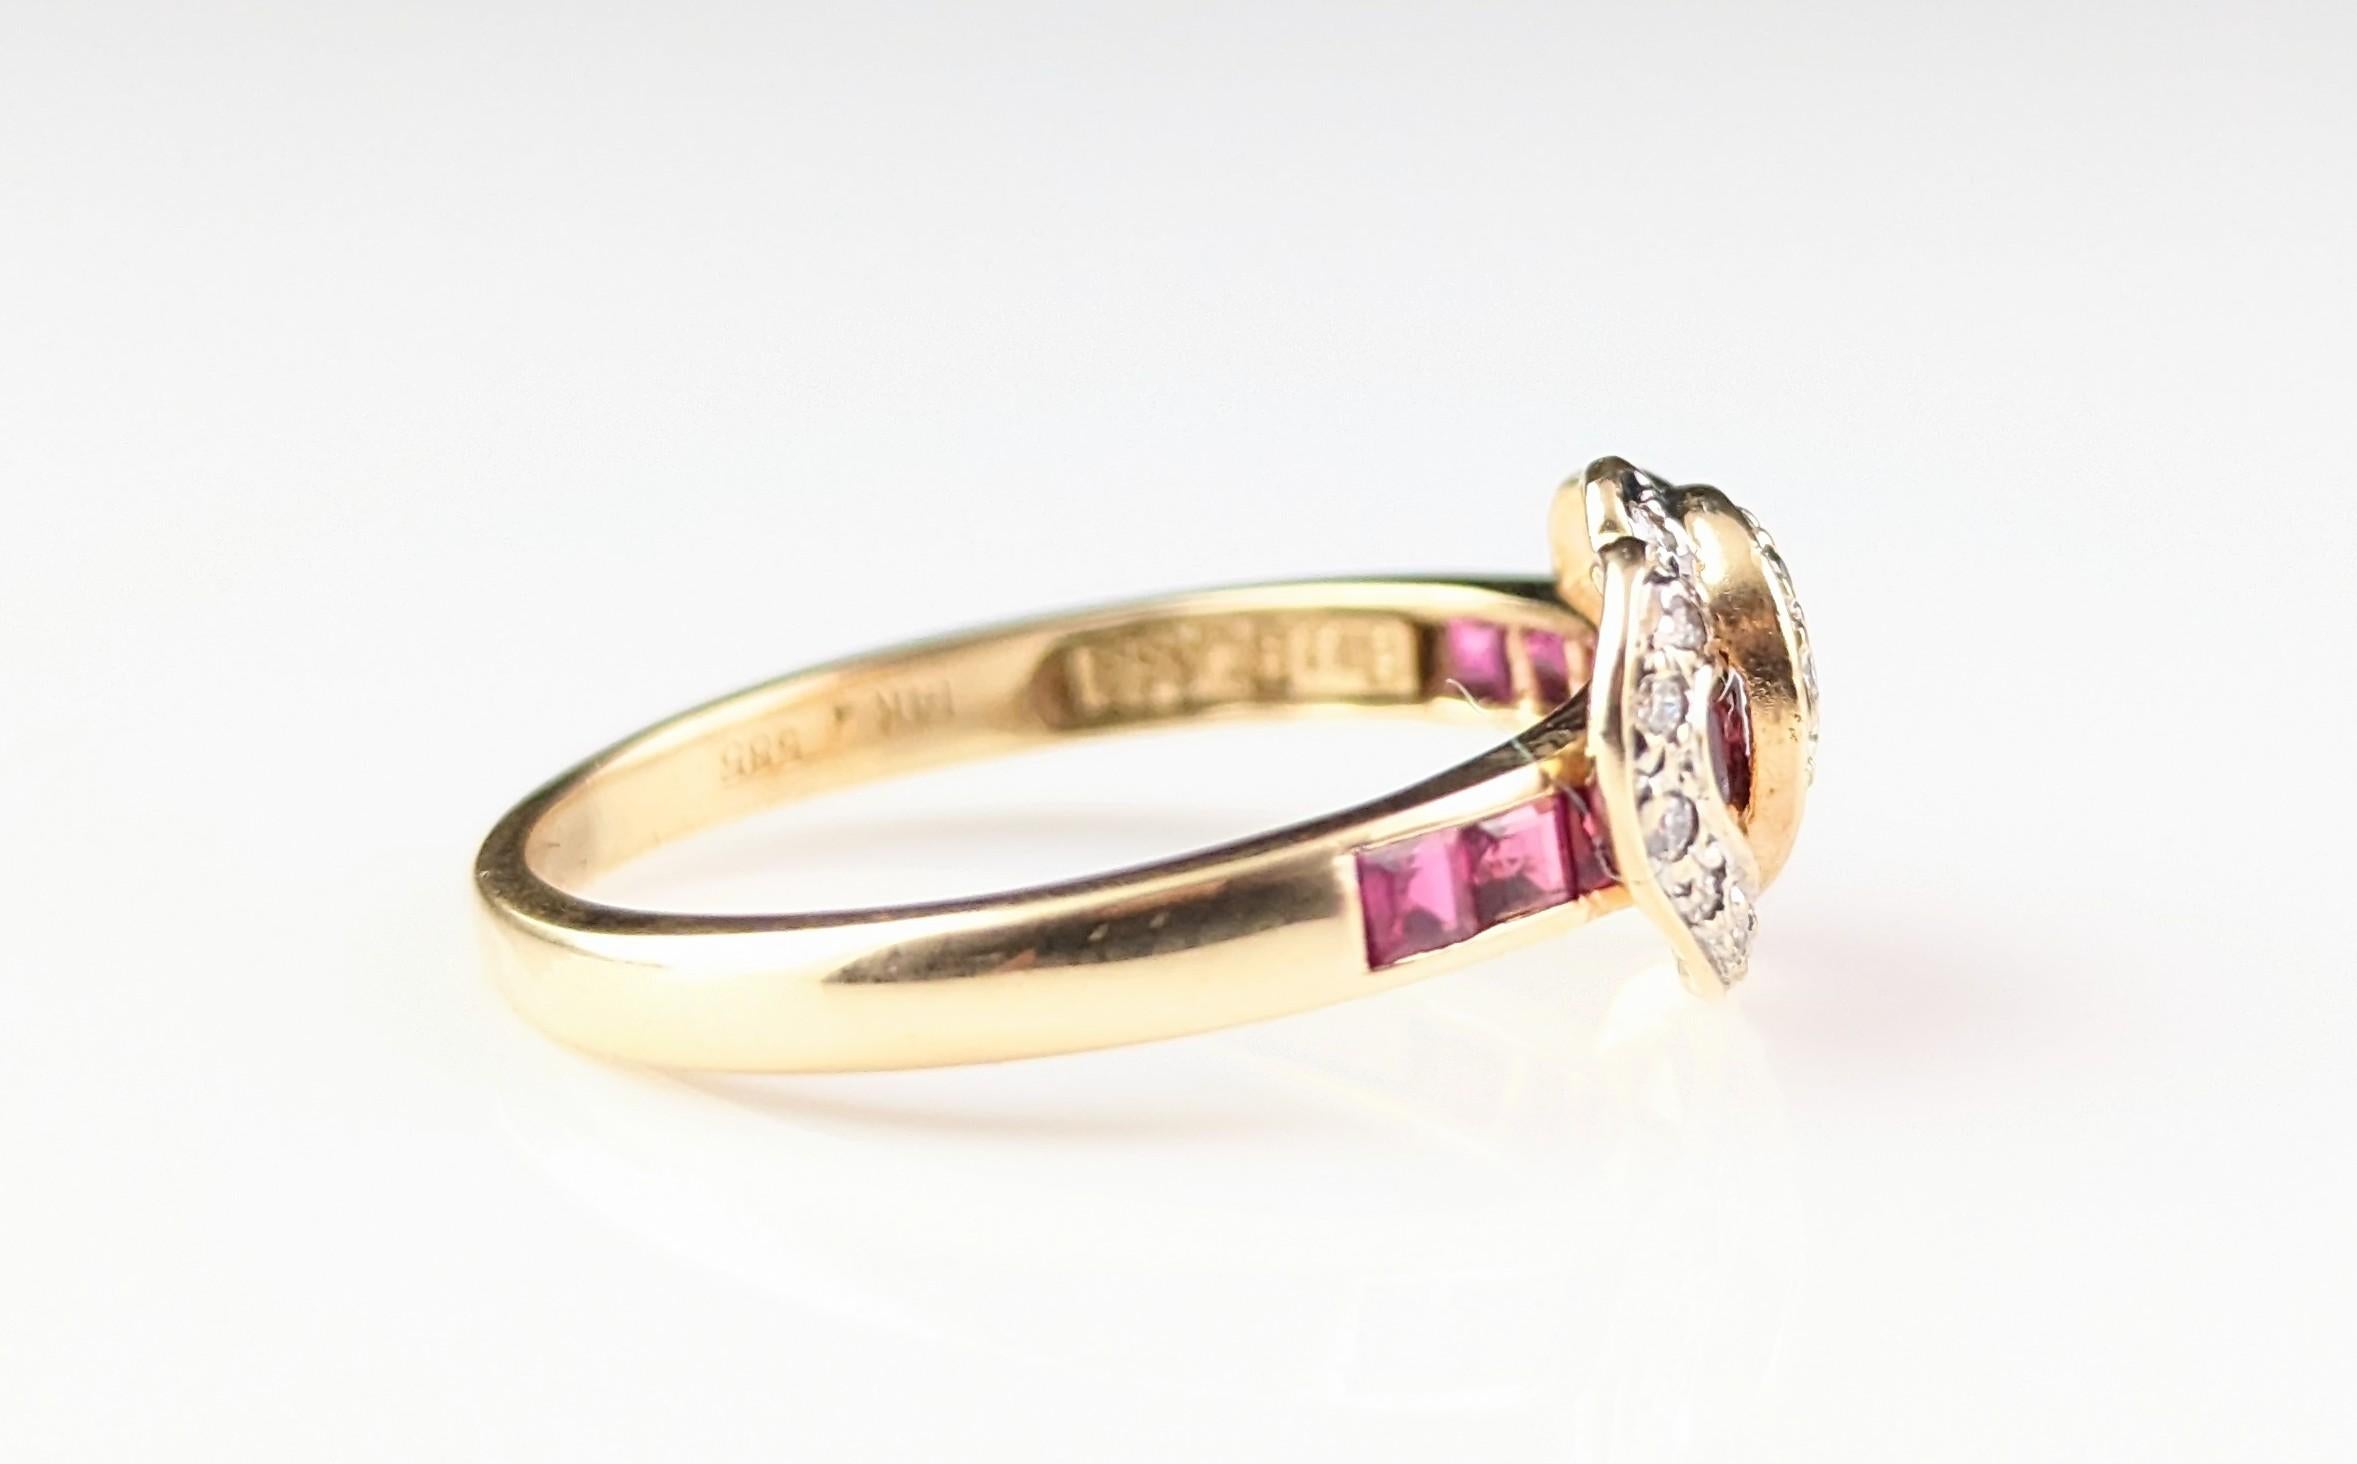 Vintage Ruby and Diamond double love heart ring, 14k yellow gold  6